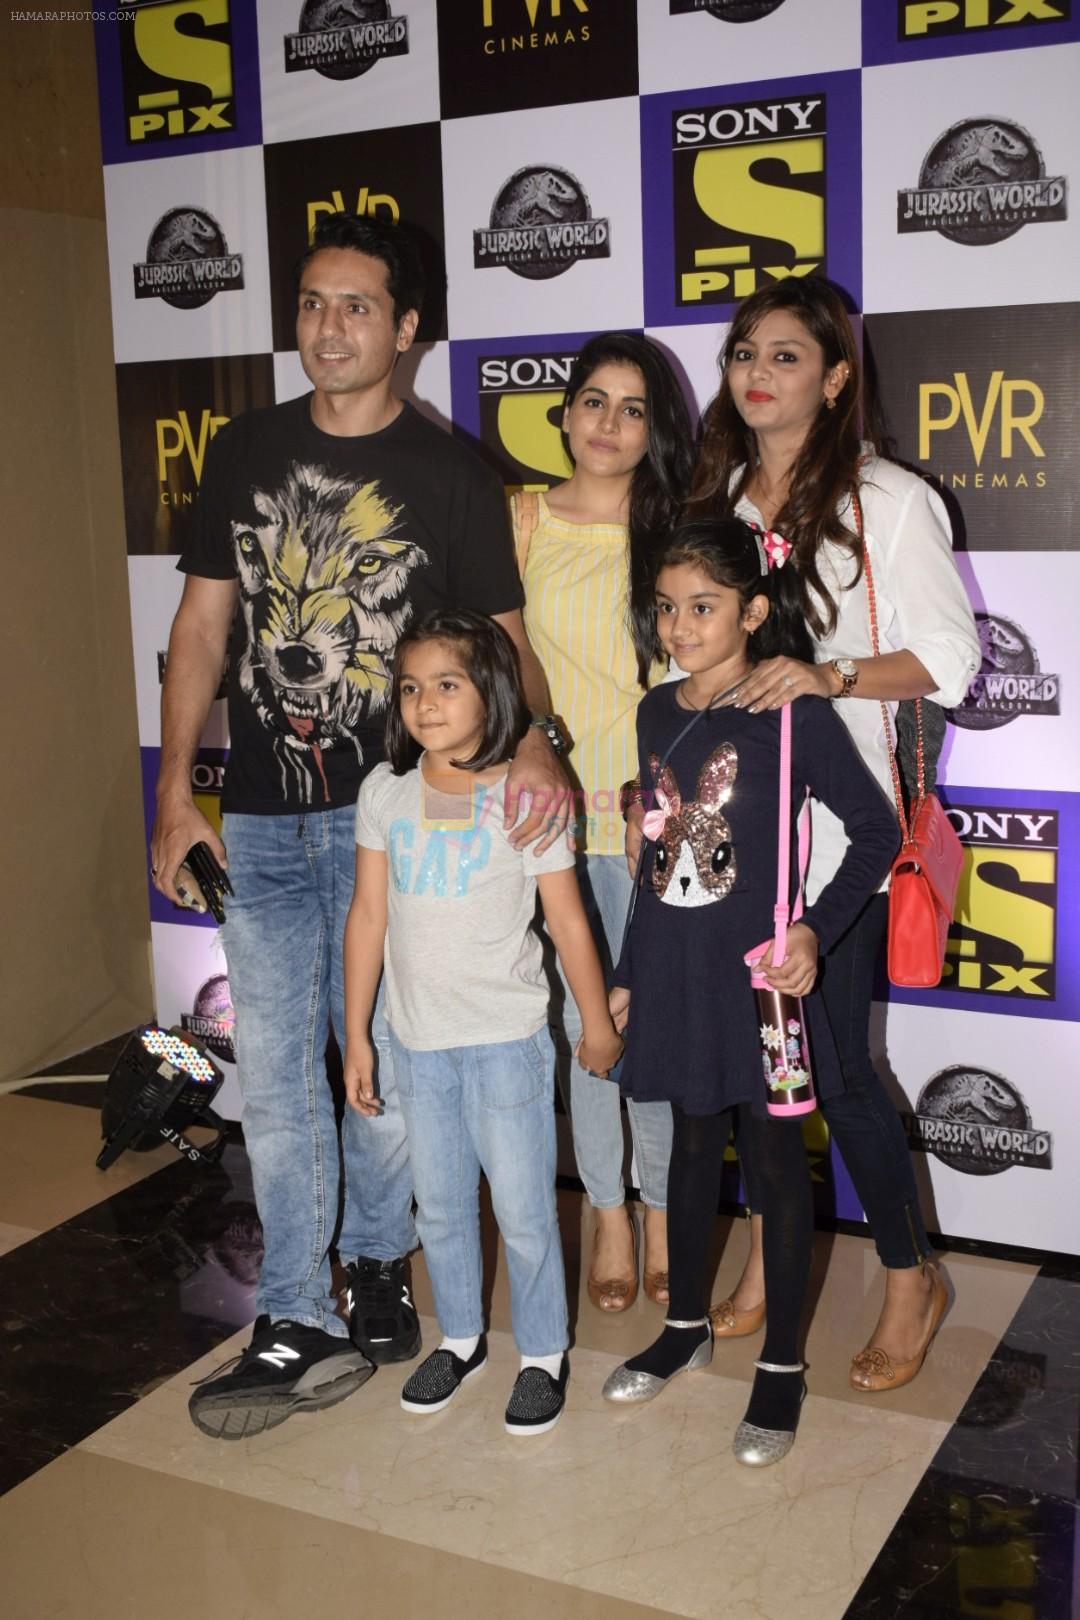 at the Screening of Jurassic world in PVR icon Andheri on 6th June 2018